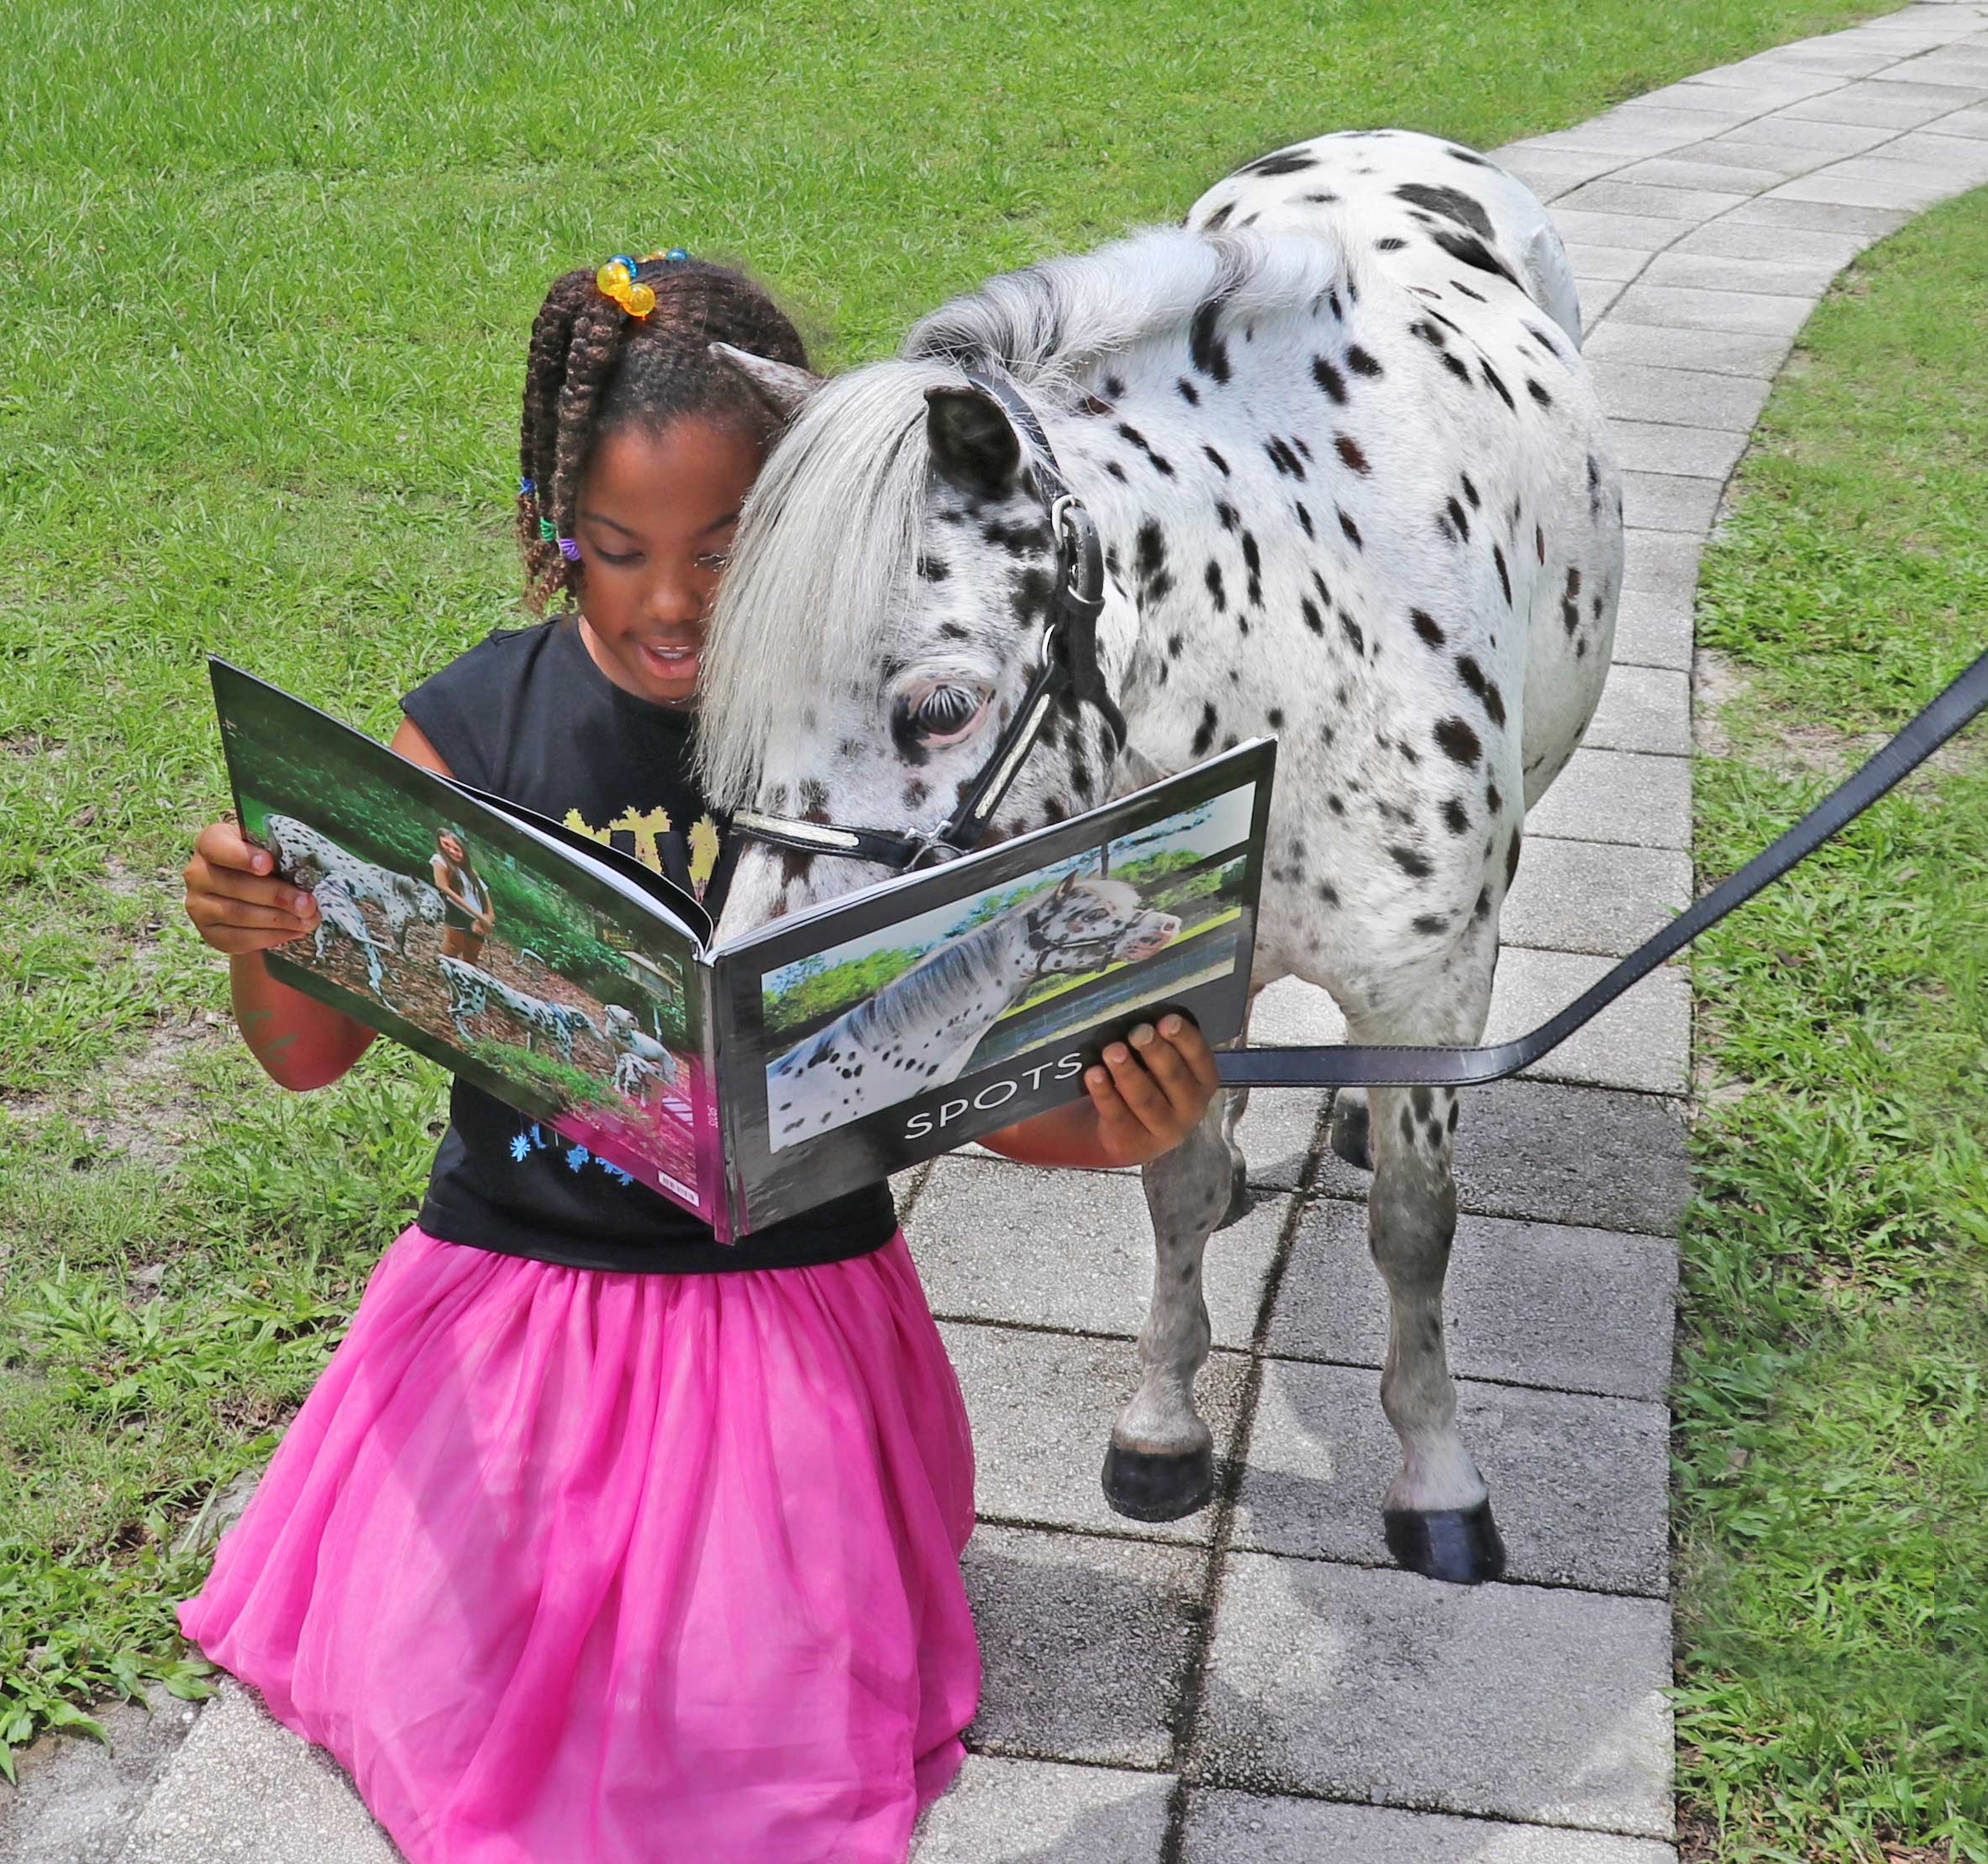 Circus and his new friend looking at a book called "Spots".